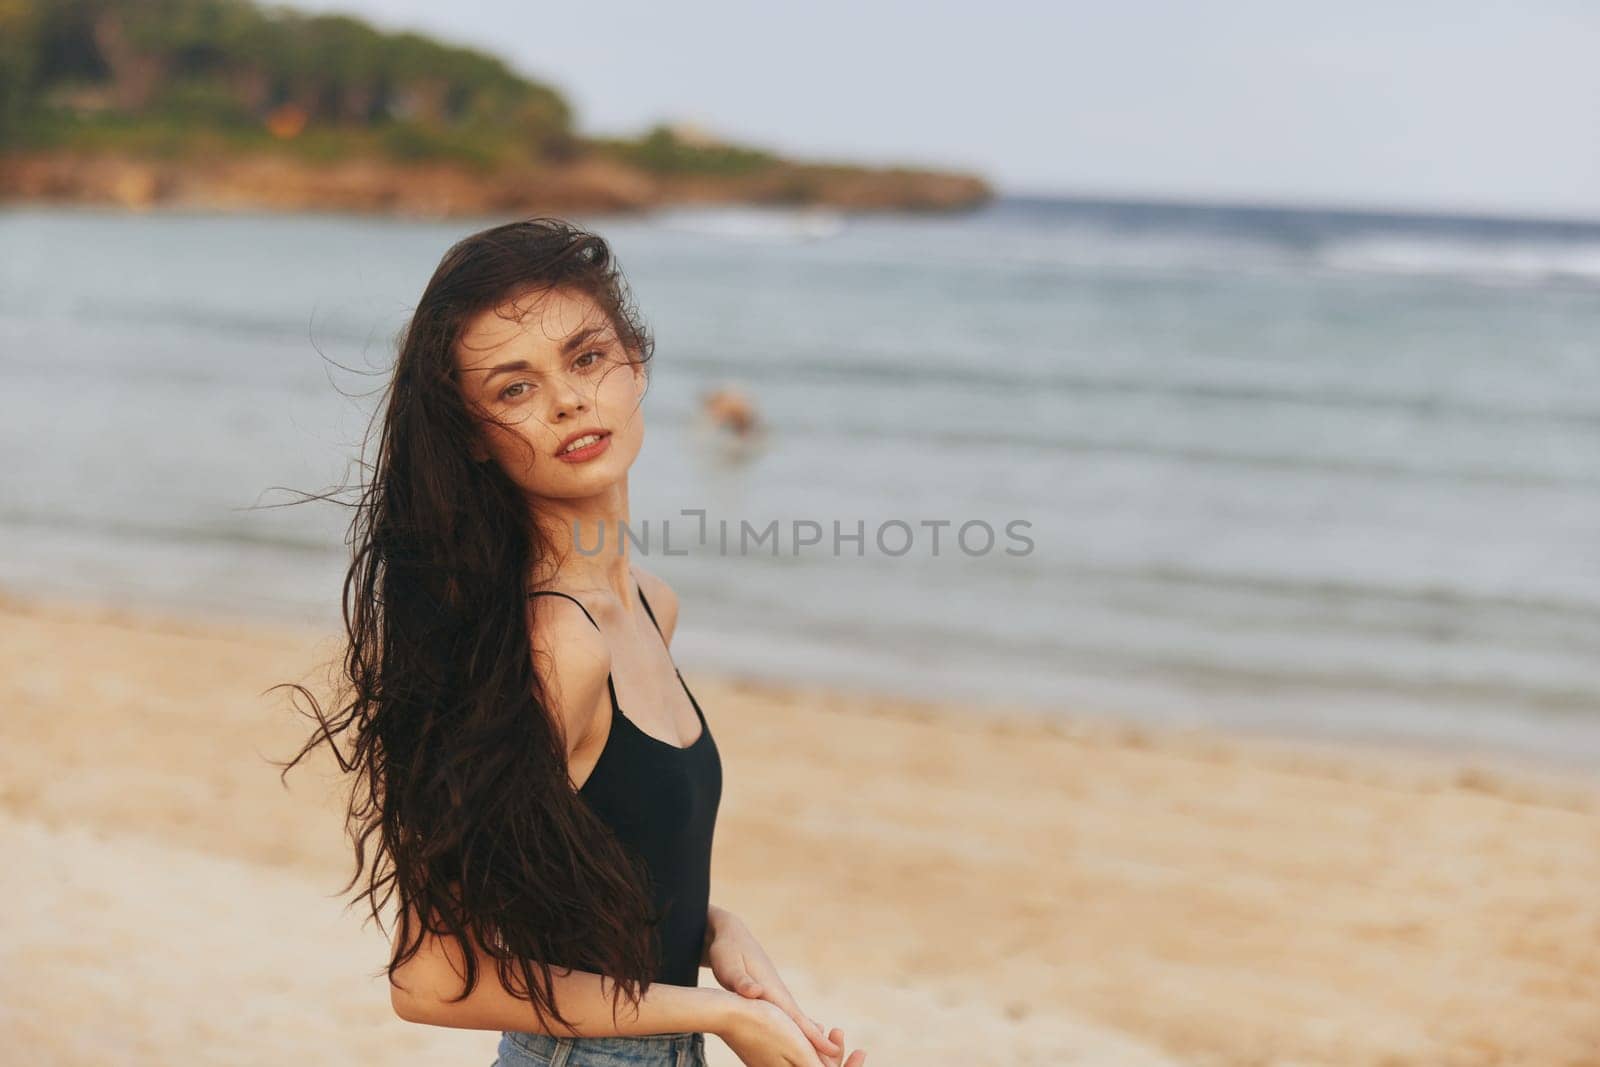 woman running travel tropical happiness shore sea summer happy beach vacation walk smile lifestyle sky ocean sunset girl female sand sunlight